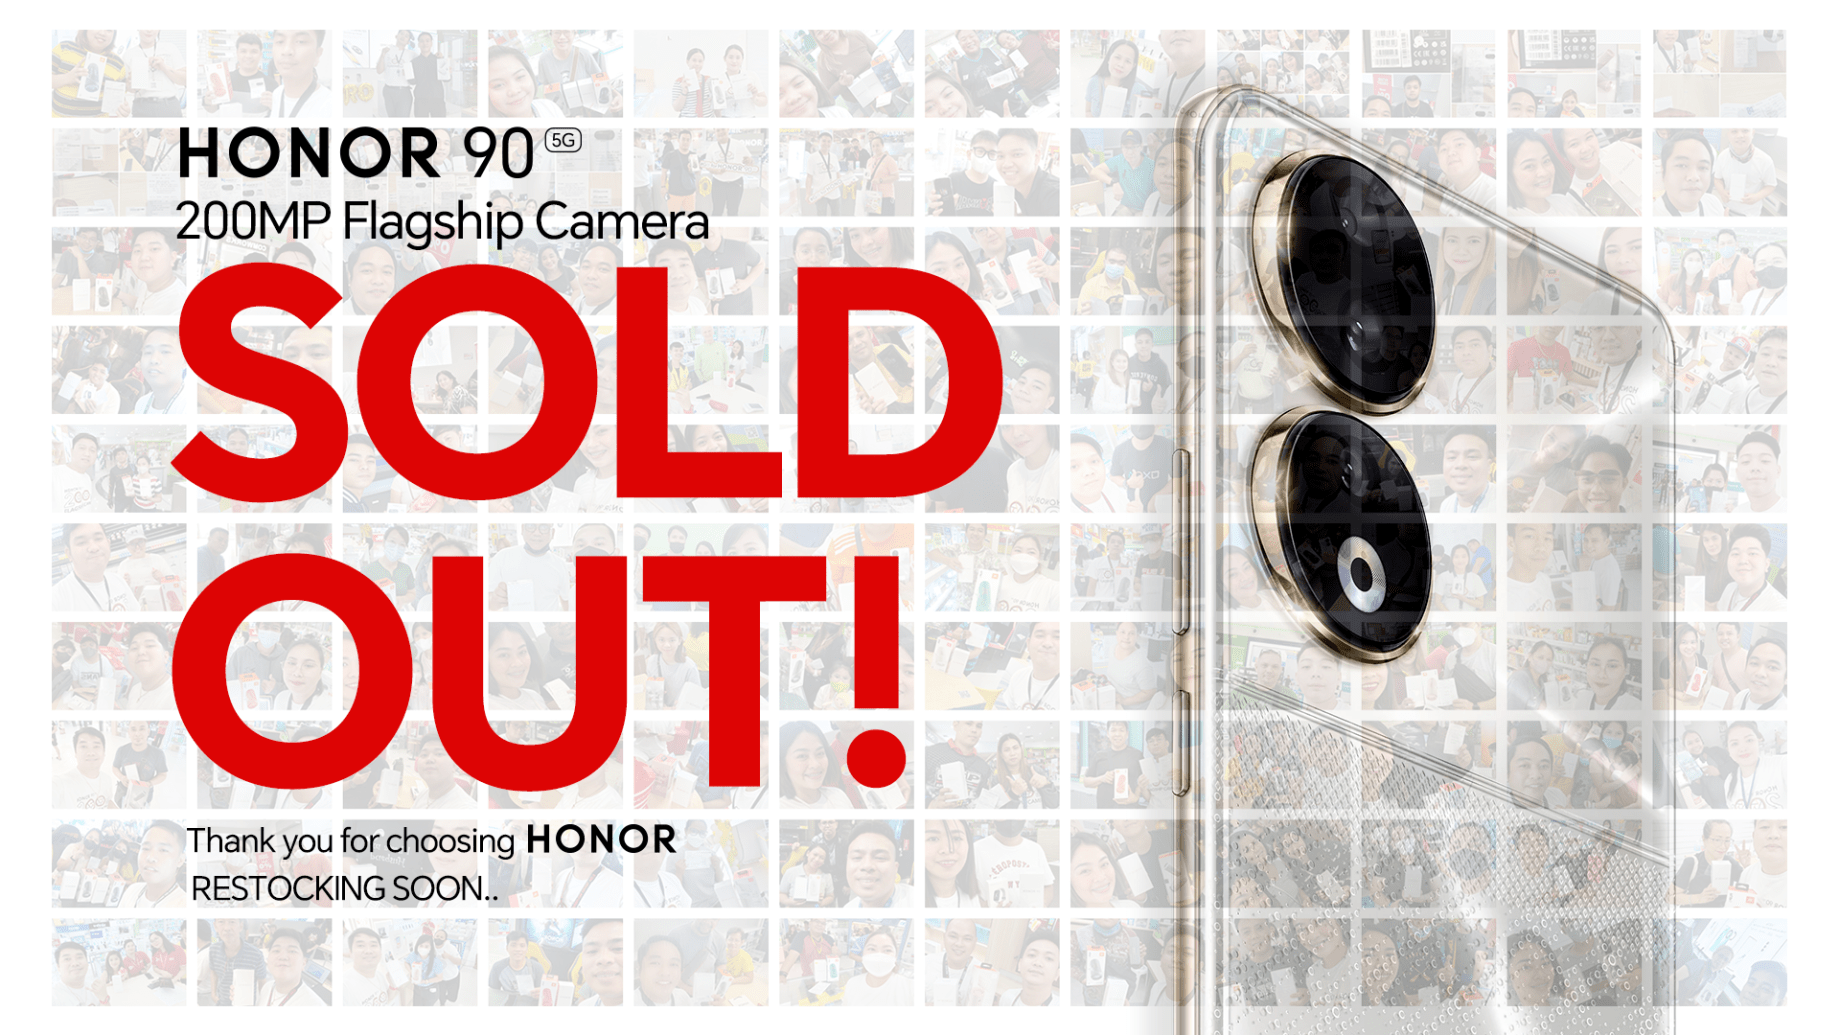 HONOR 90 5G Sold Out! High Demand from Public Forces HONOR to Restock Soon